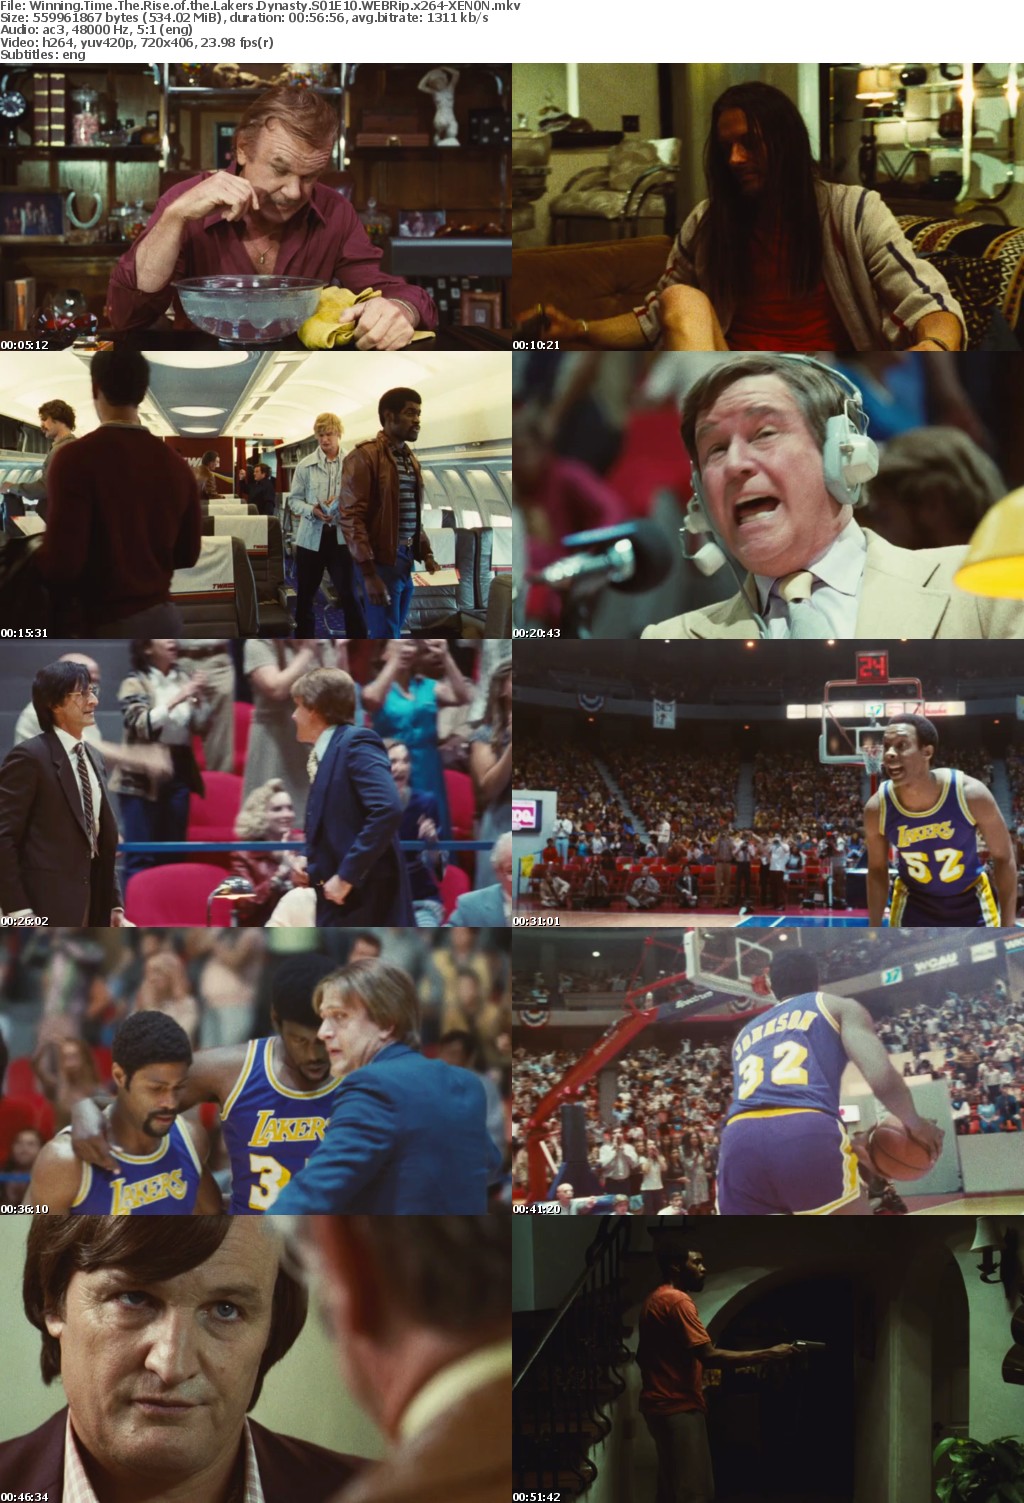 Winning Time The Rise of the Lakers Dynasty S01E10 WEBRip x264-XEN0N